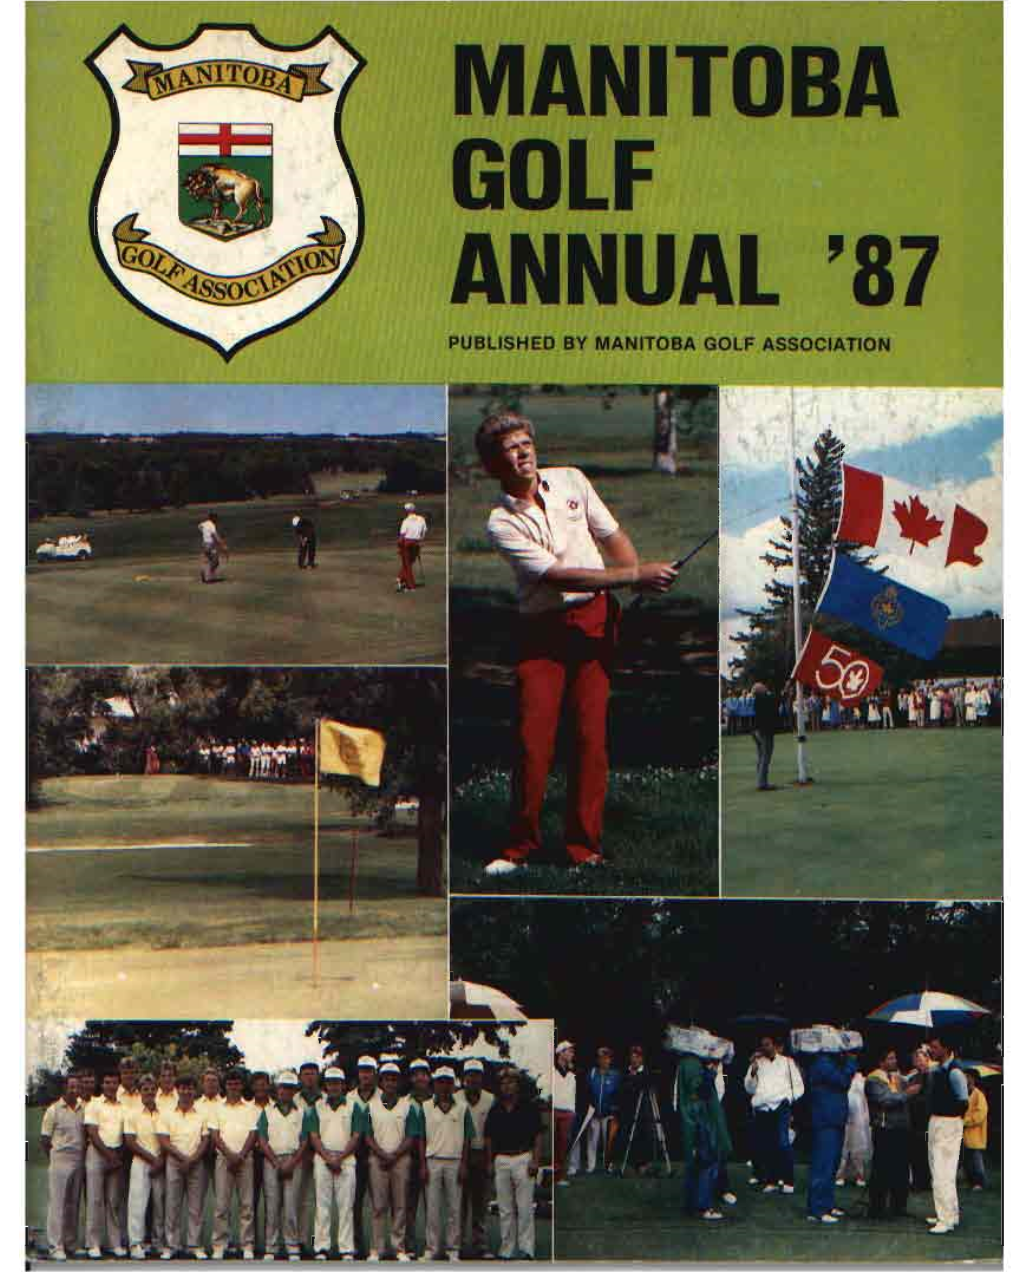 F ANNUAL '87 PUBLISHED by MANITOBA GOLF Associanon Call for the Captain